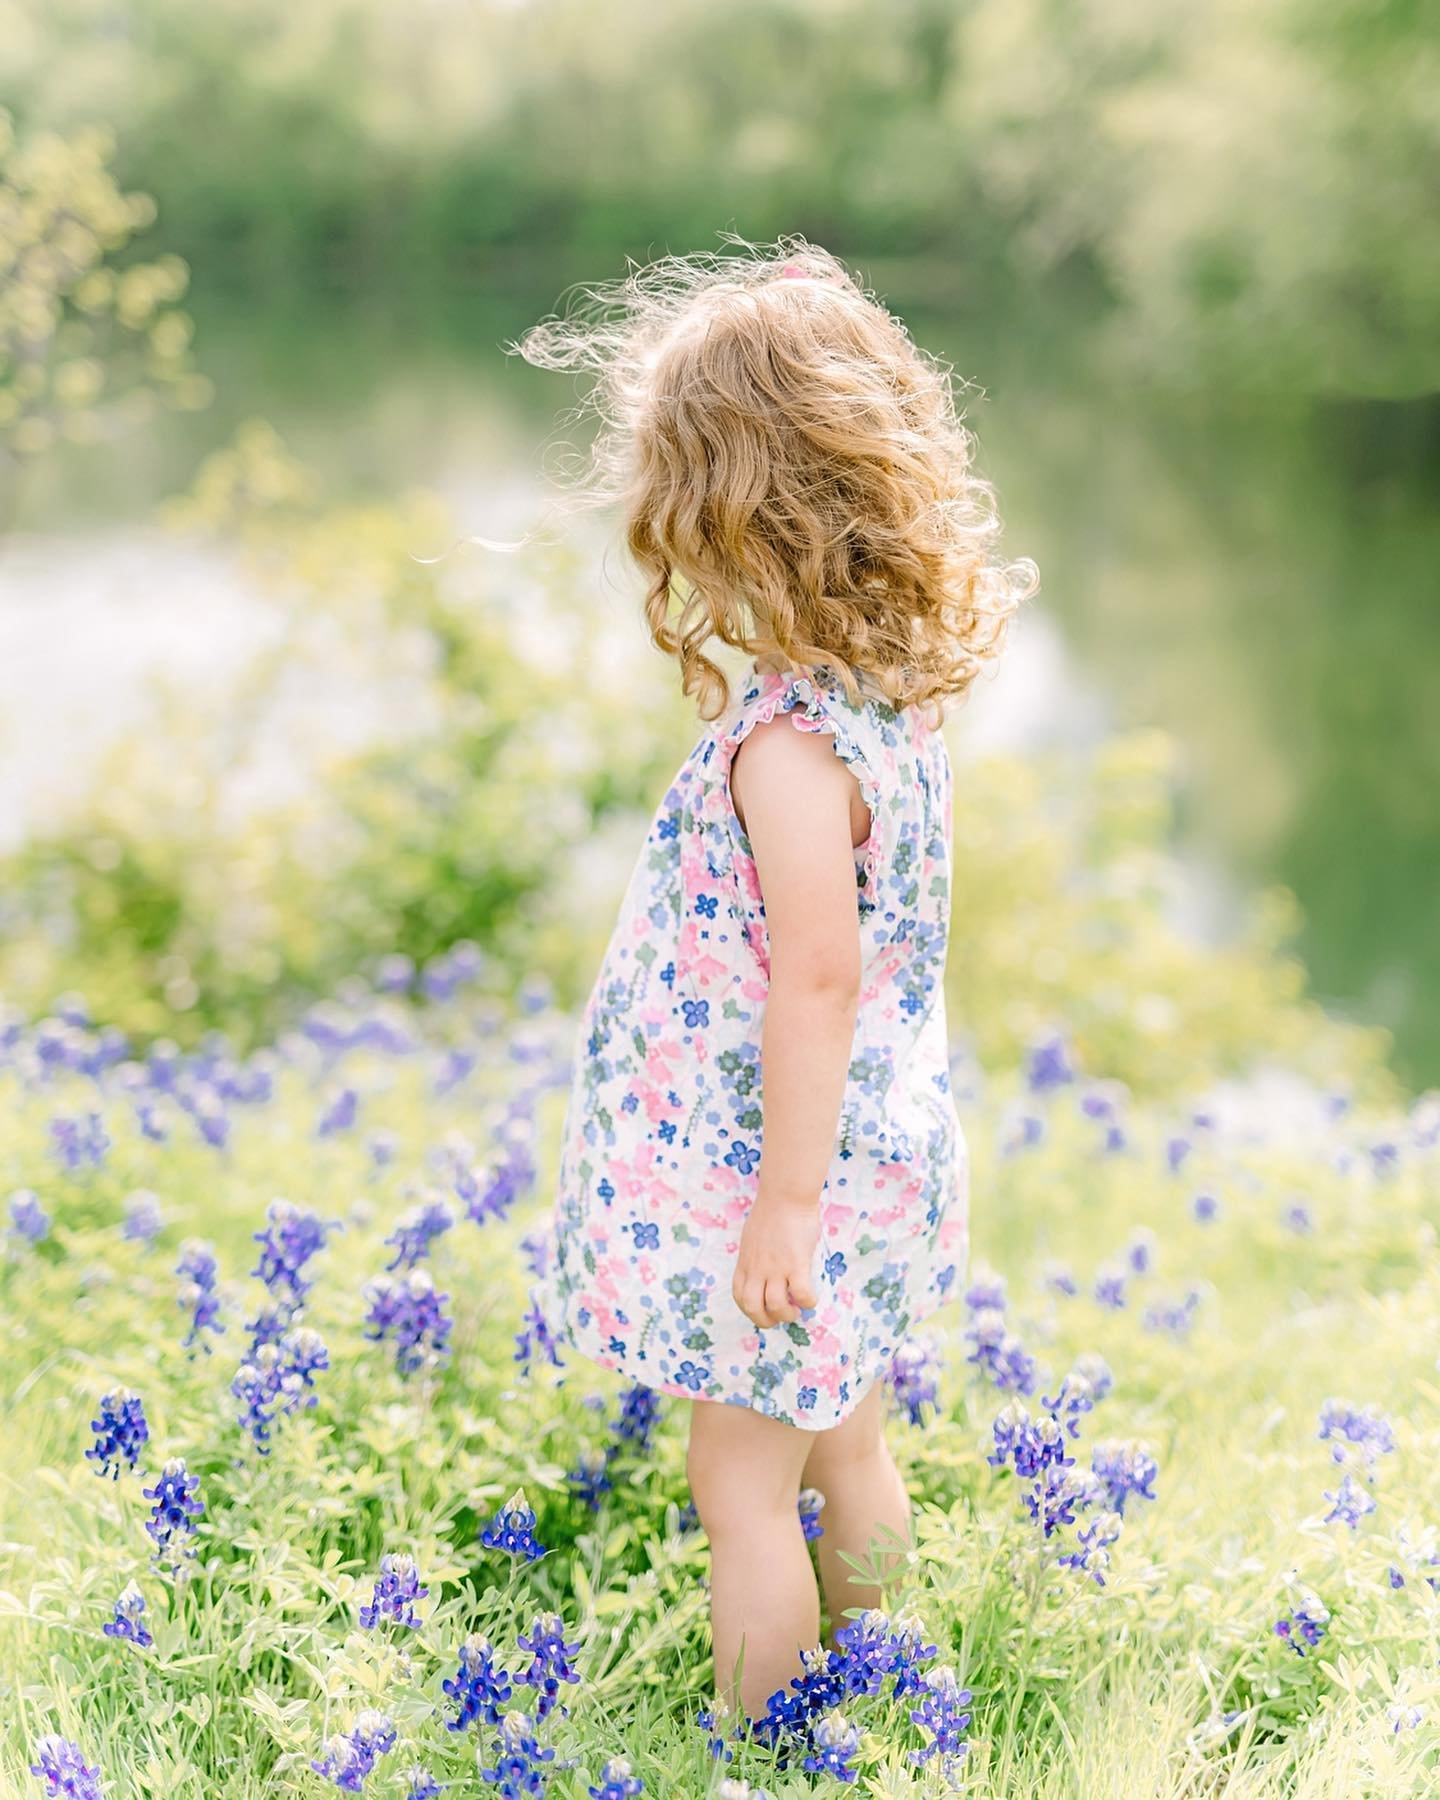 Discovering the world through the eyes of a child, amidst a field of bluebonnets. Such sweetness reminding us to find beauty in the simplest of moments 🤍
.
.
.
.
.
#dallasfamilyphotographer #dfwfamilyphotographer #fortworthfamilyphotographer #planof